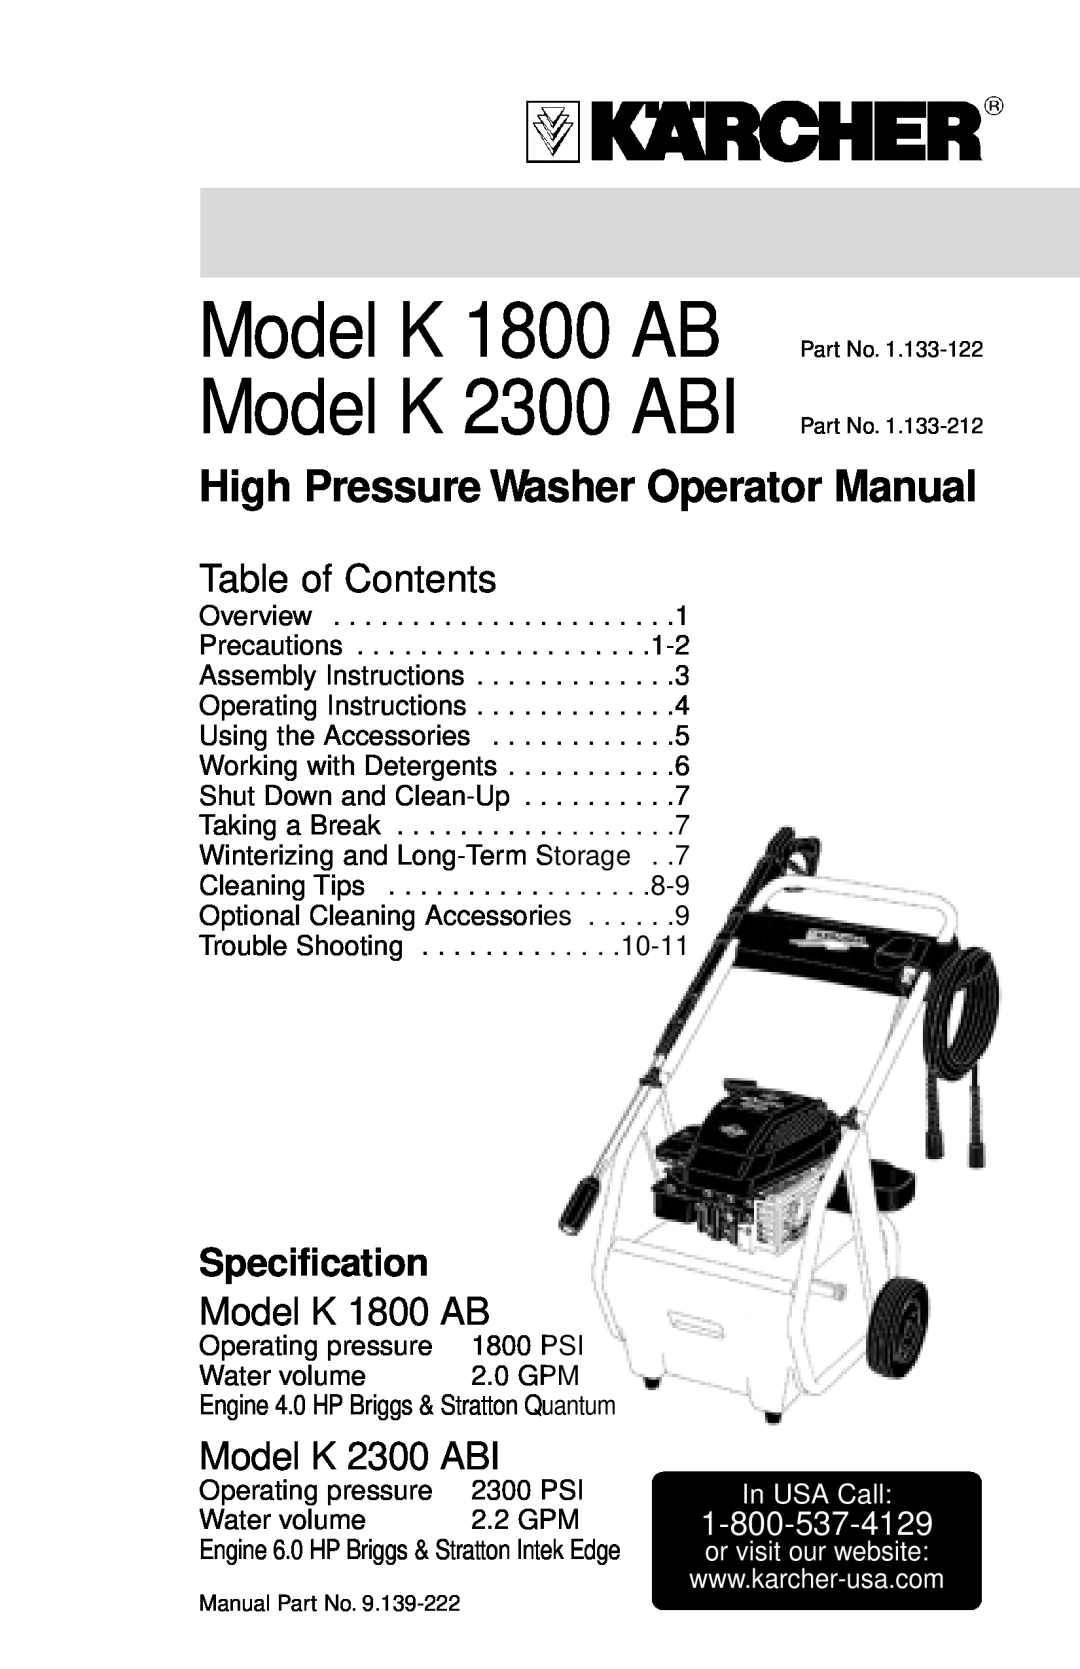 Karcher manual Table of Contents, In USA Call, Model K 1800 AB Model K 2300 ABI, Specification 